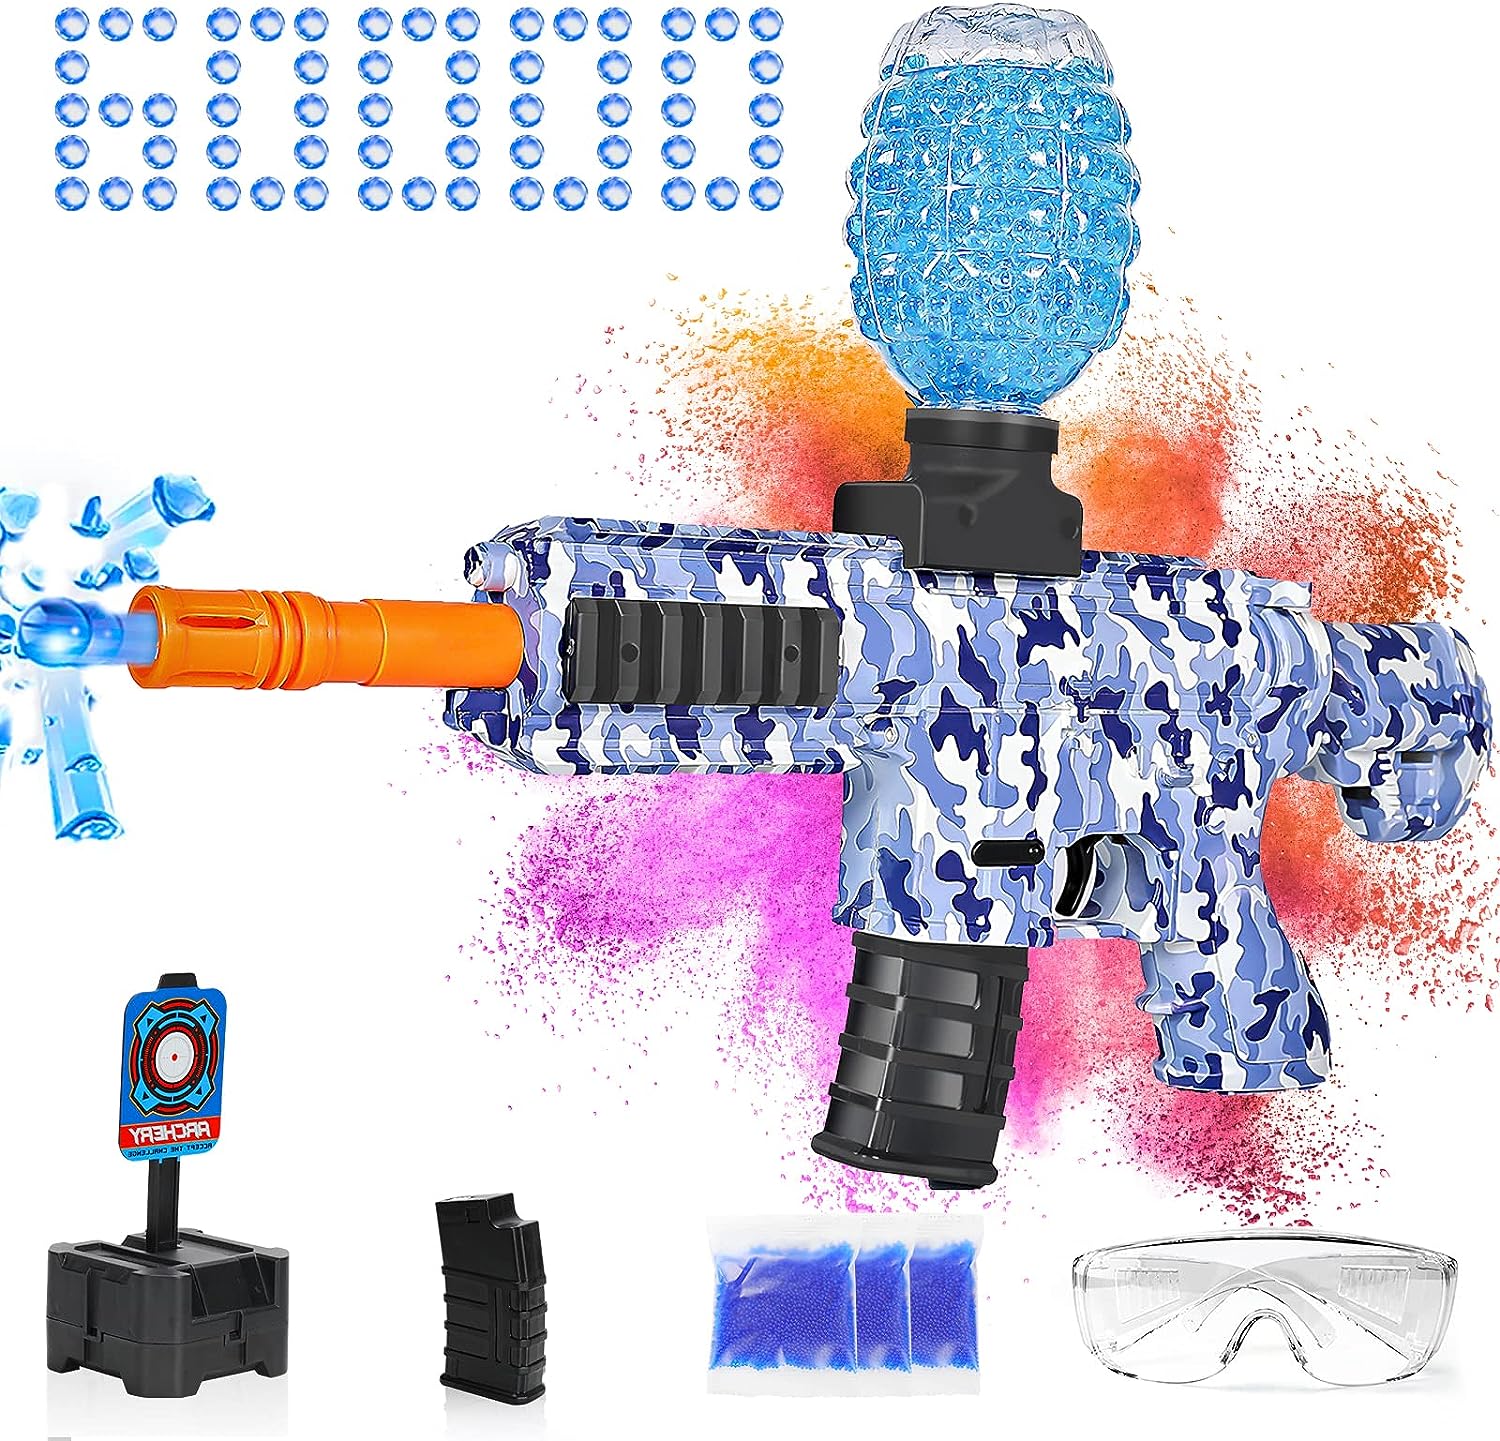 An automatic orbeez gun perfect for outdoor team games and activities. The gun features a vibrant blue color and comes with additional items.